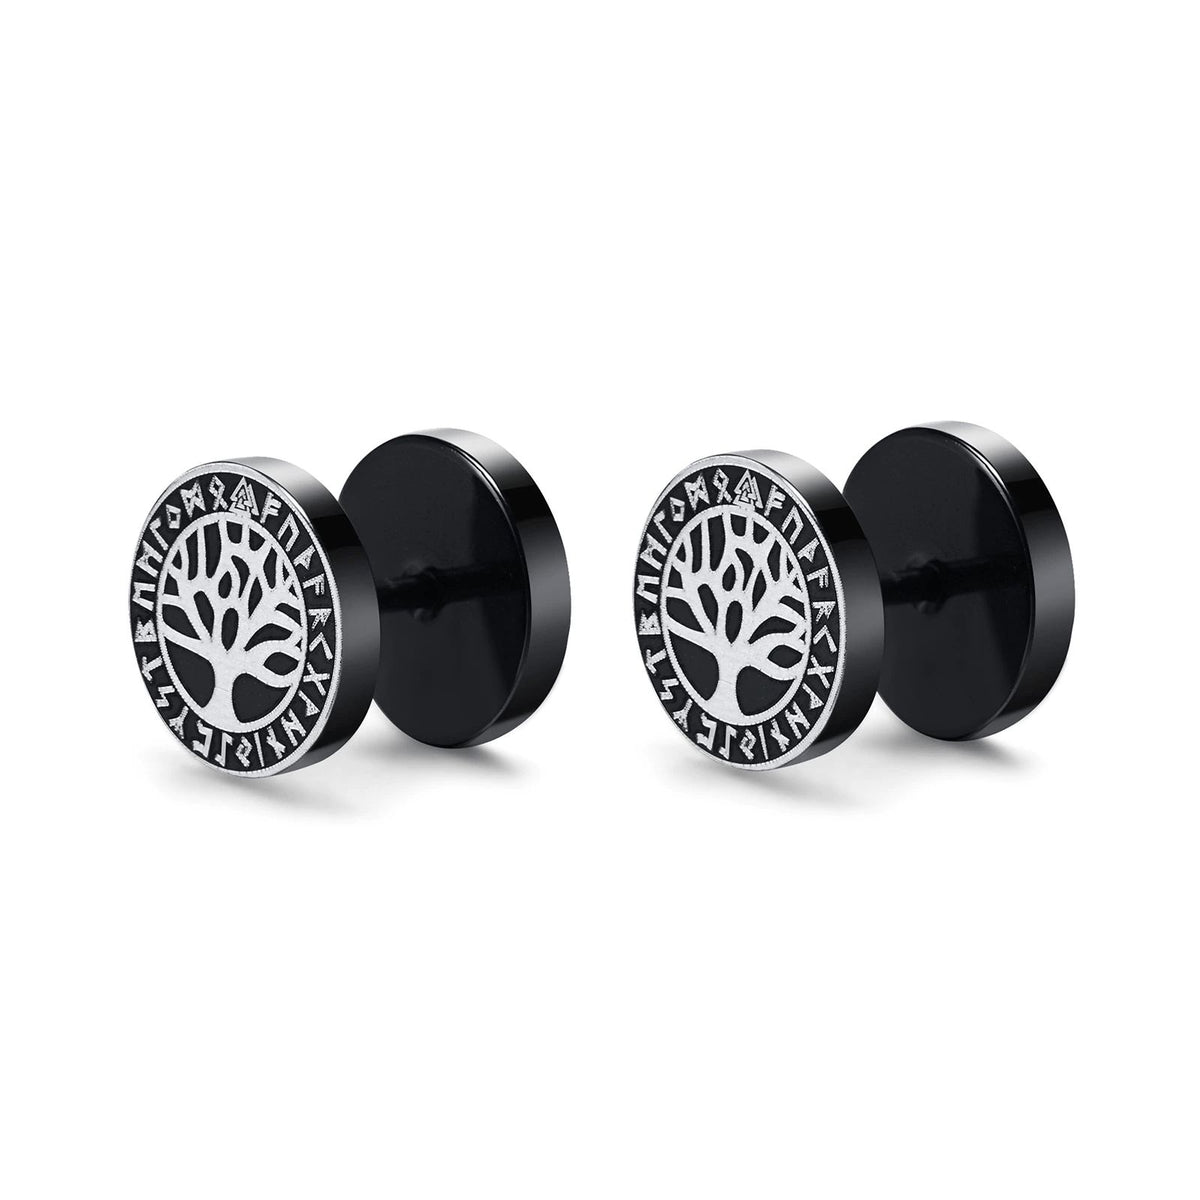 Viking Earrings with Norse Tree of Life Symbol - Black Studs-2